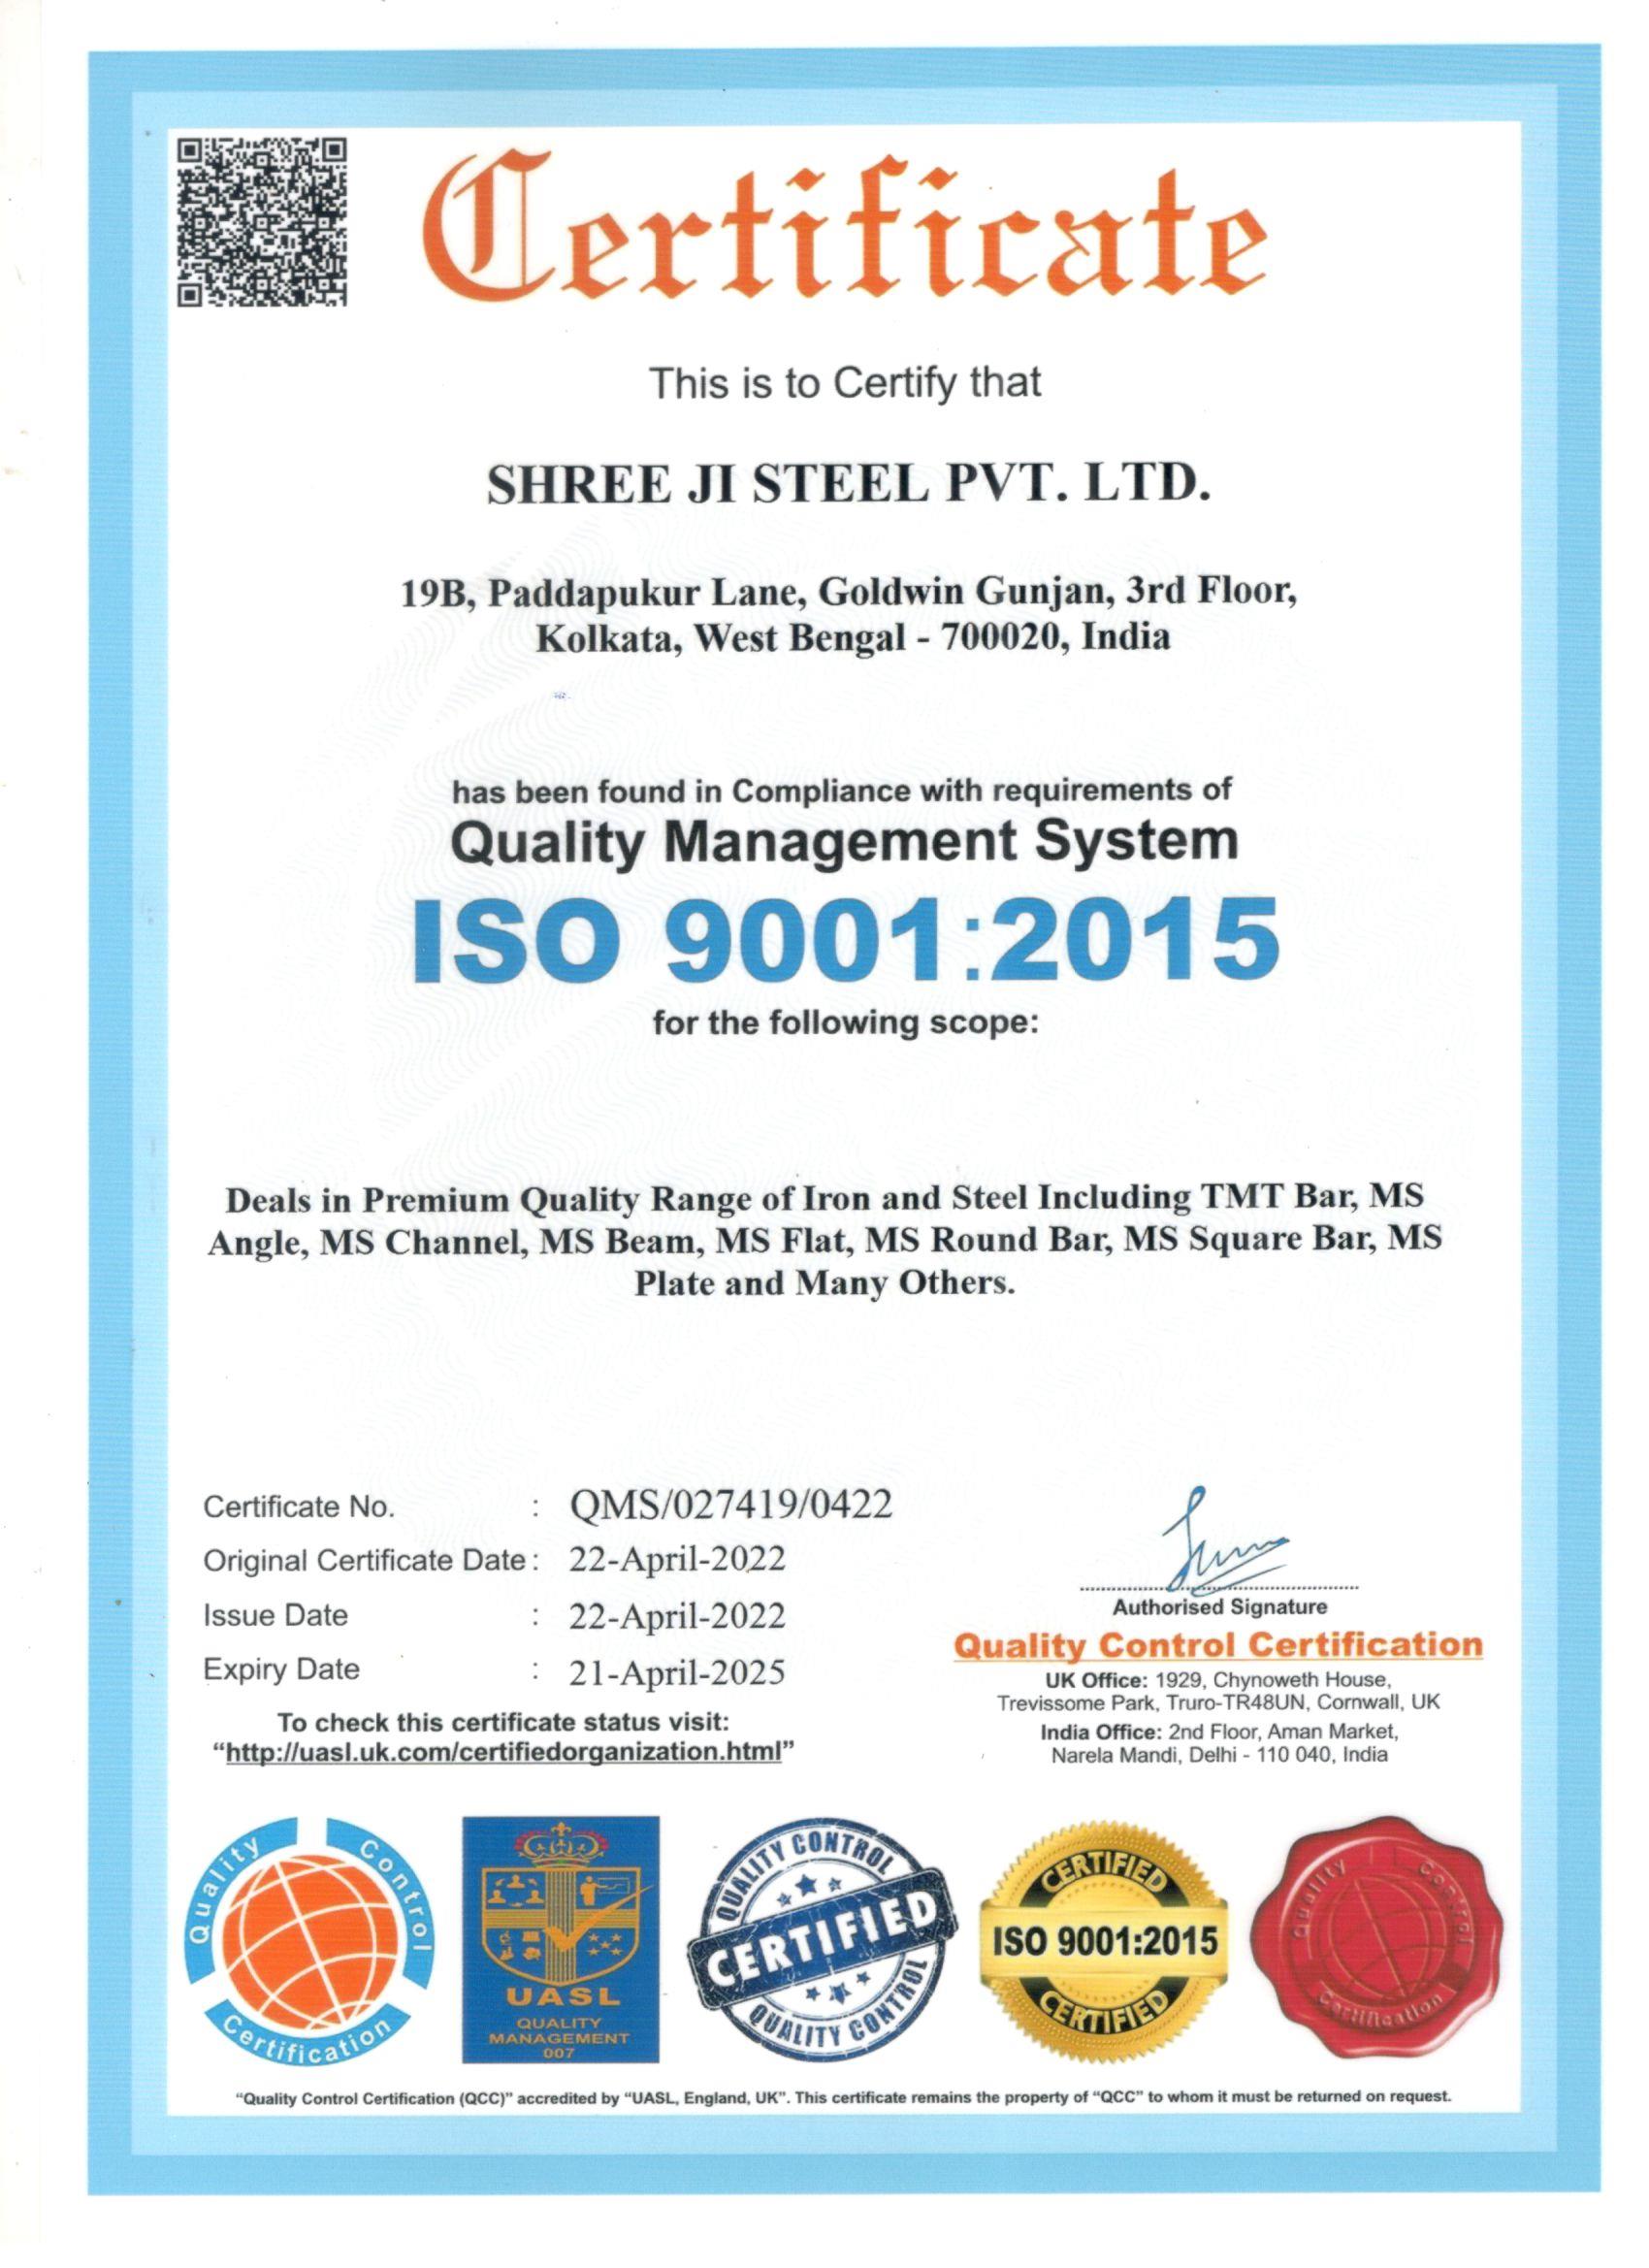 ISO 9001-2015 For shree ji steel private limited